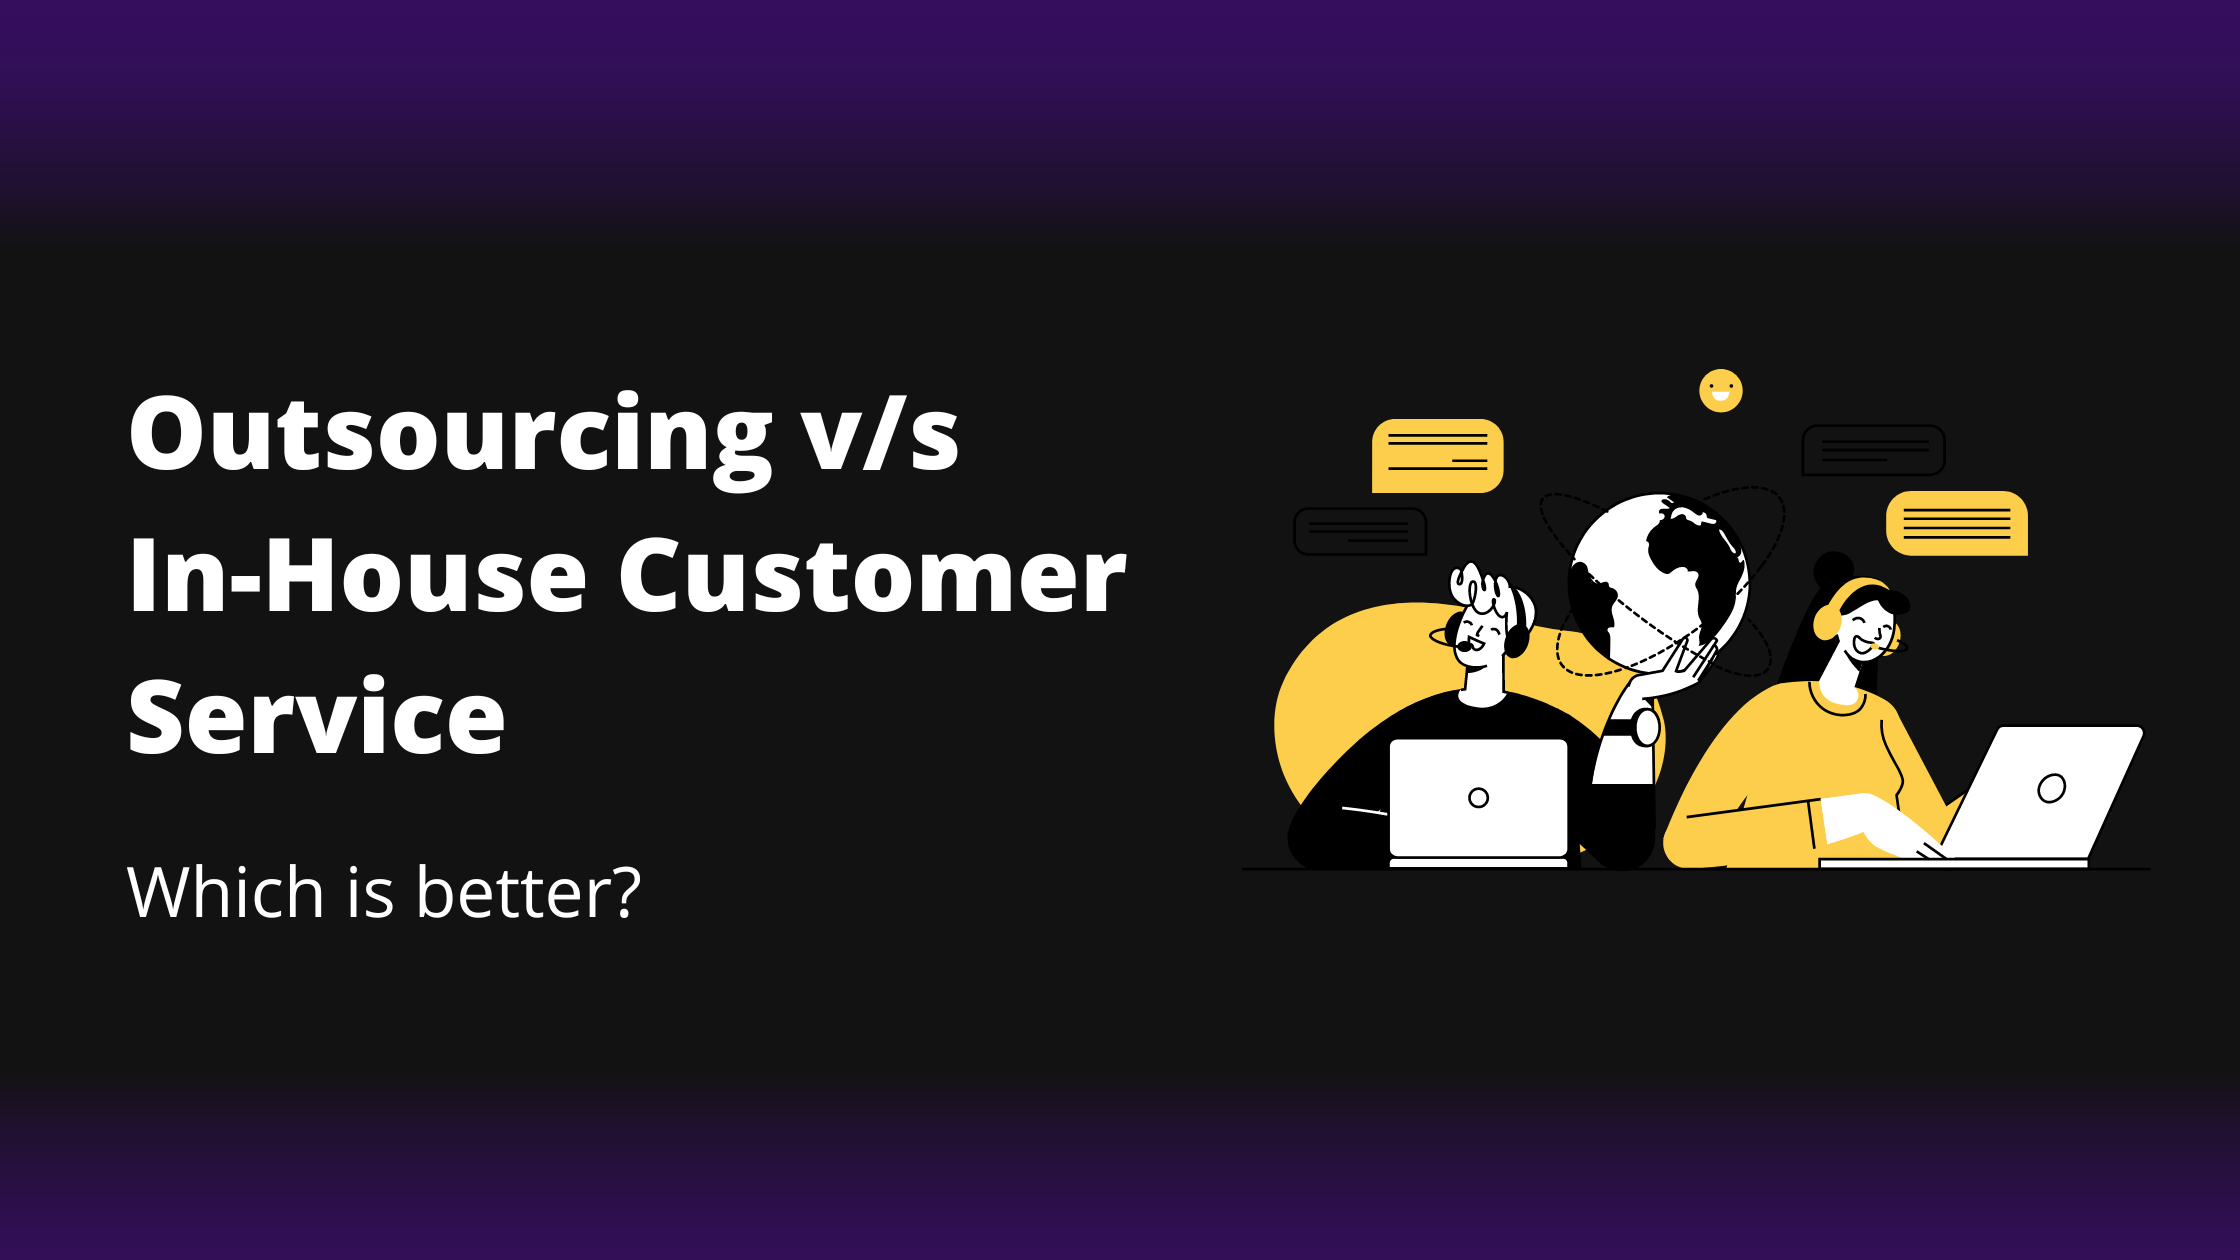 Outsourcing Vs In-house Customer Service: Which is Better?